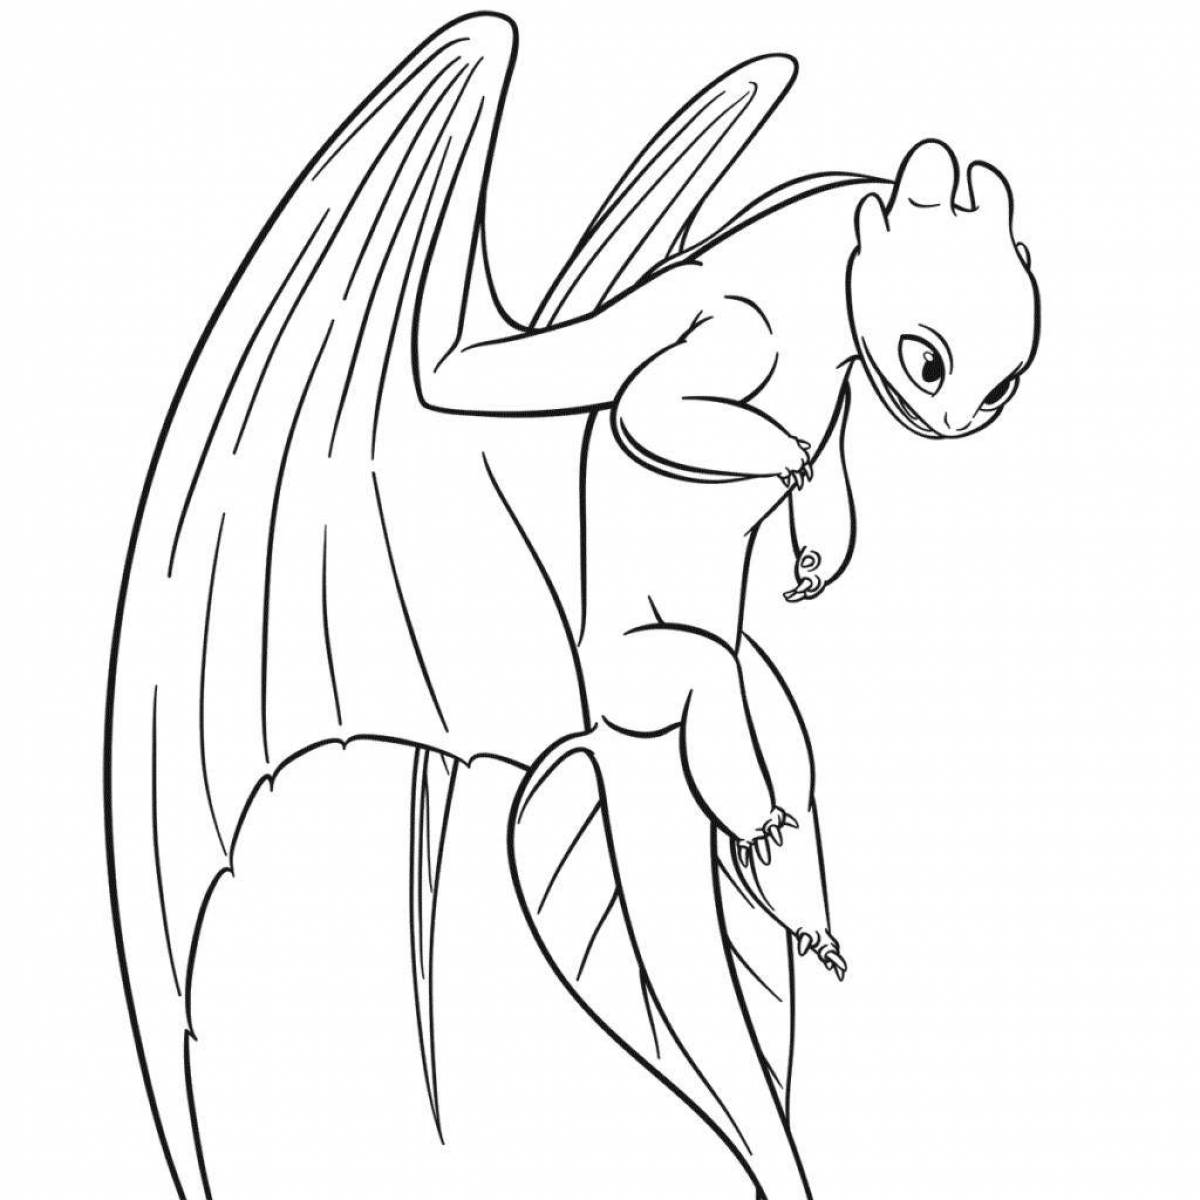 Dynamic Night Fury coloring page